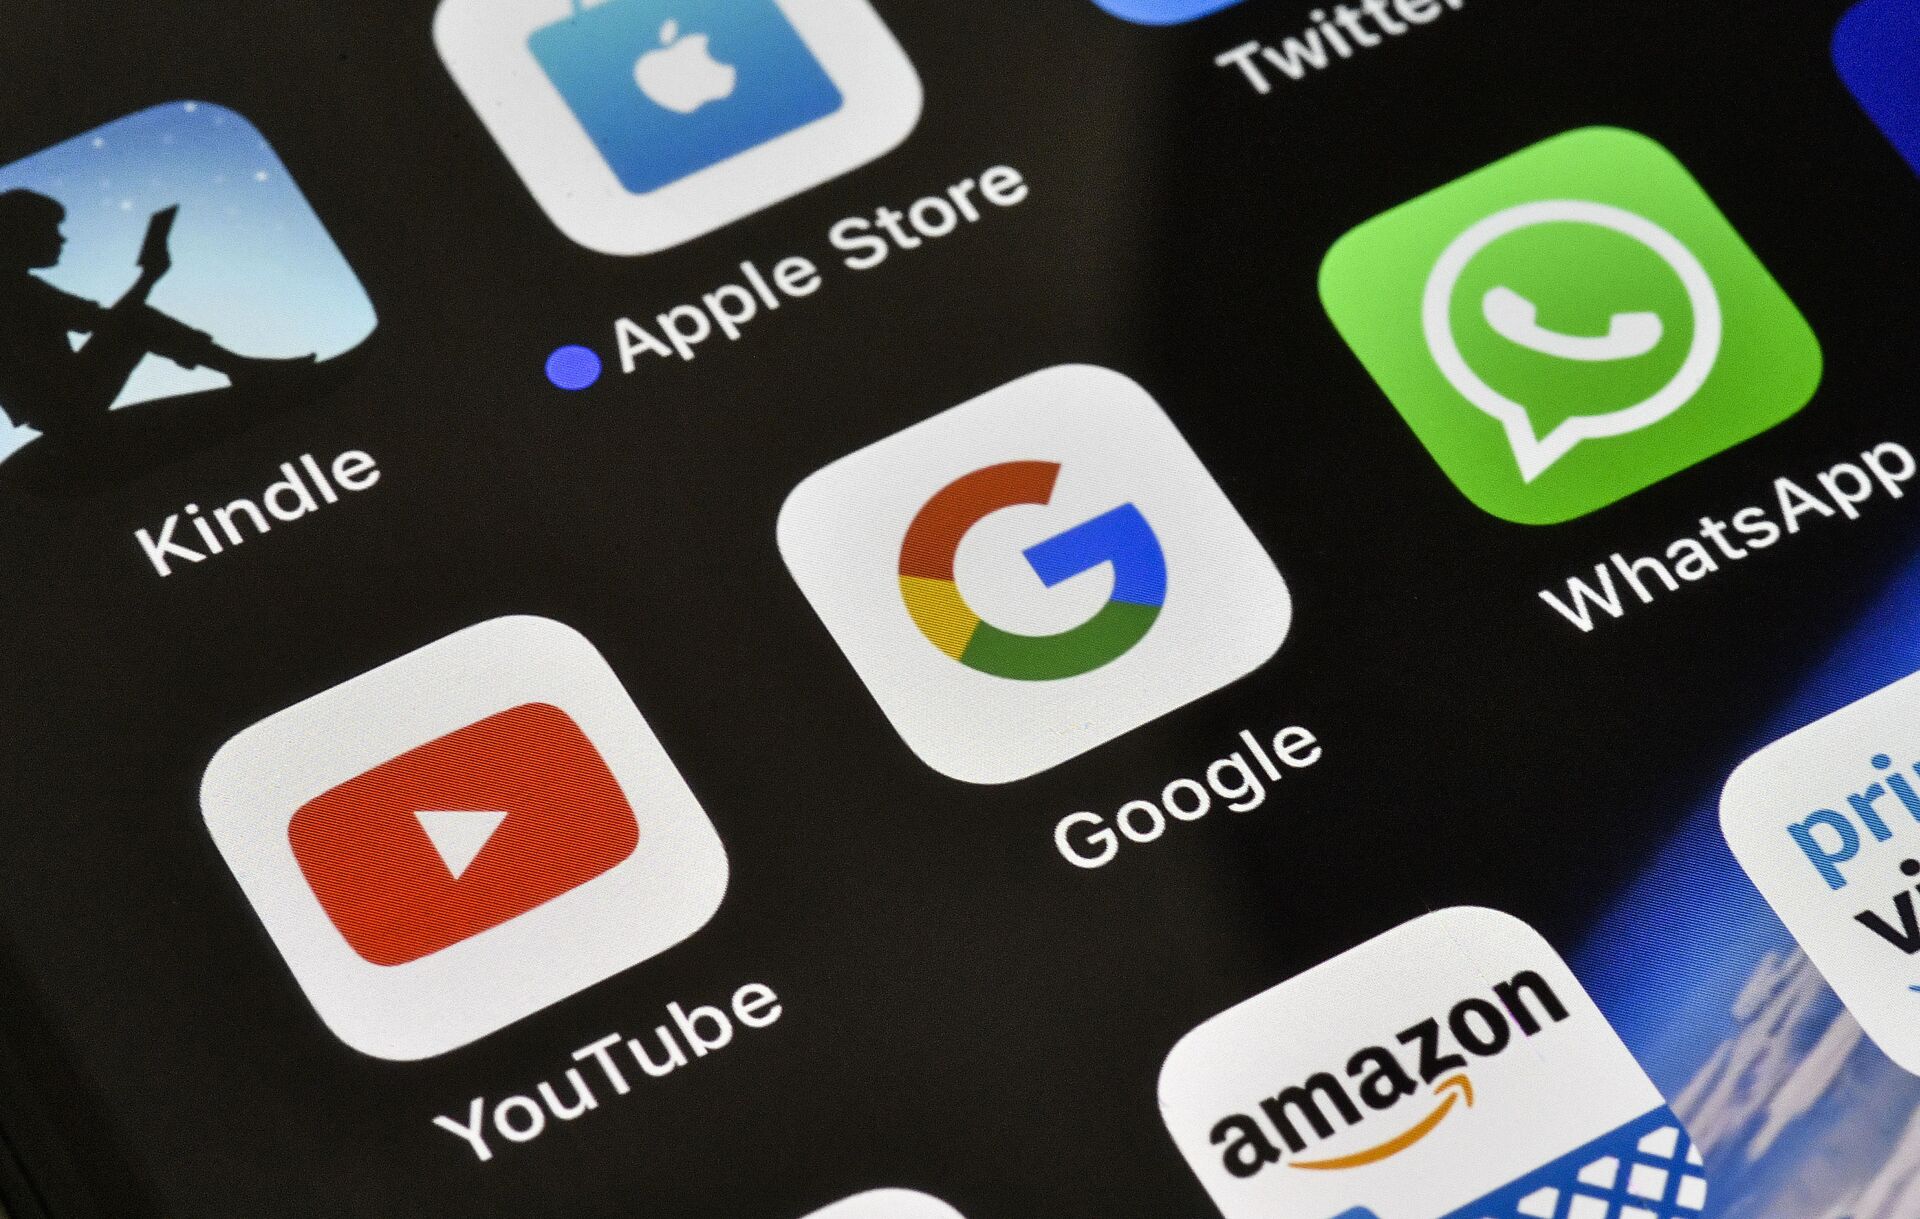 The icons of Google, WhatsApp and YouTube are pictured on an iPhone on Thursday, Nov. 15, 2018 in Gelsenkirchen, Germany - Sputnik International, 1920, 07.09.2021